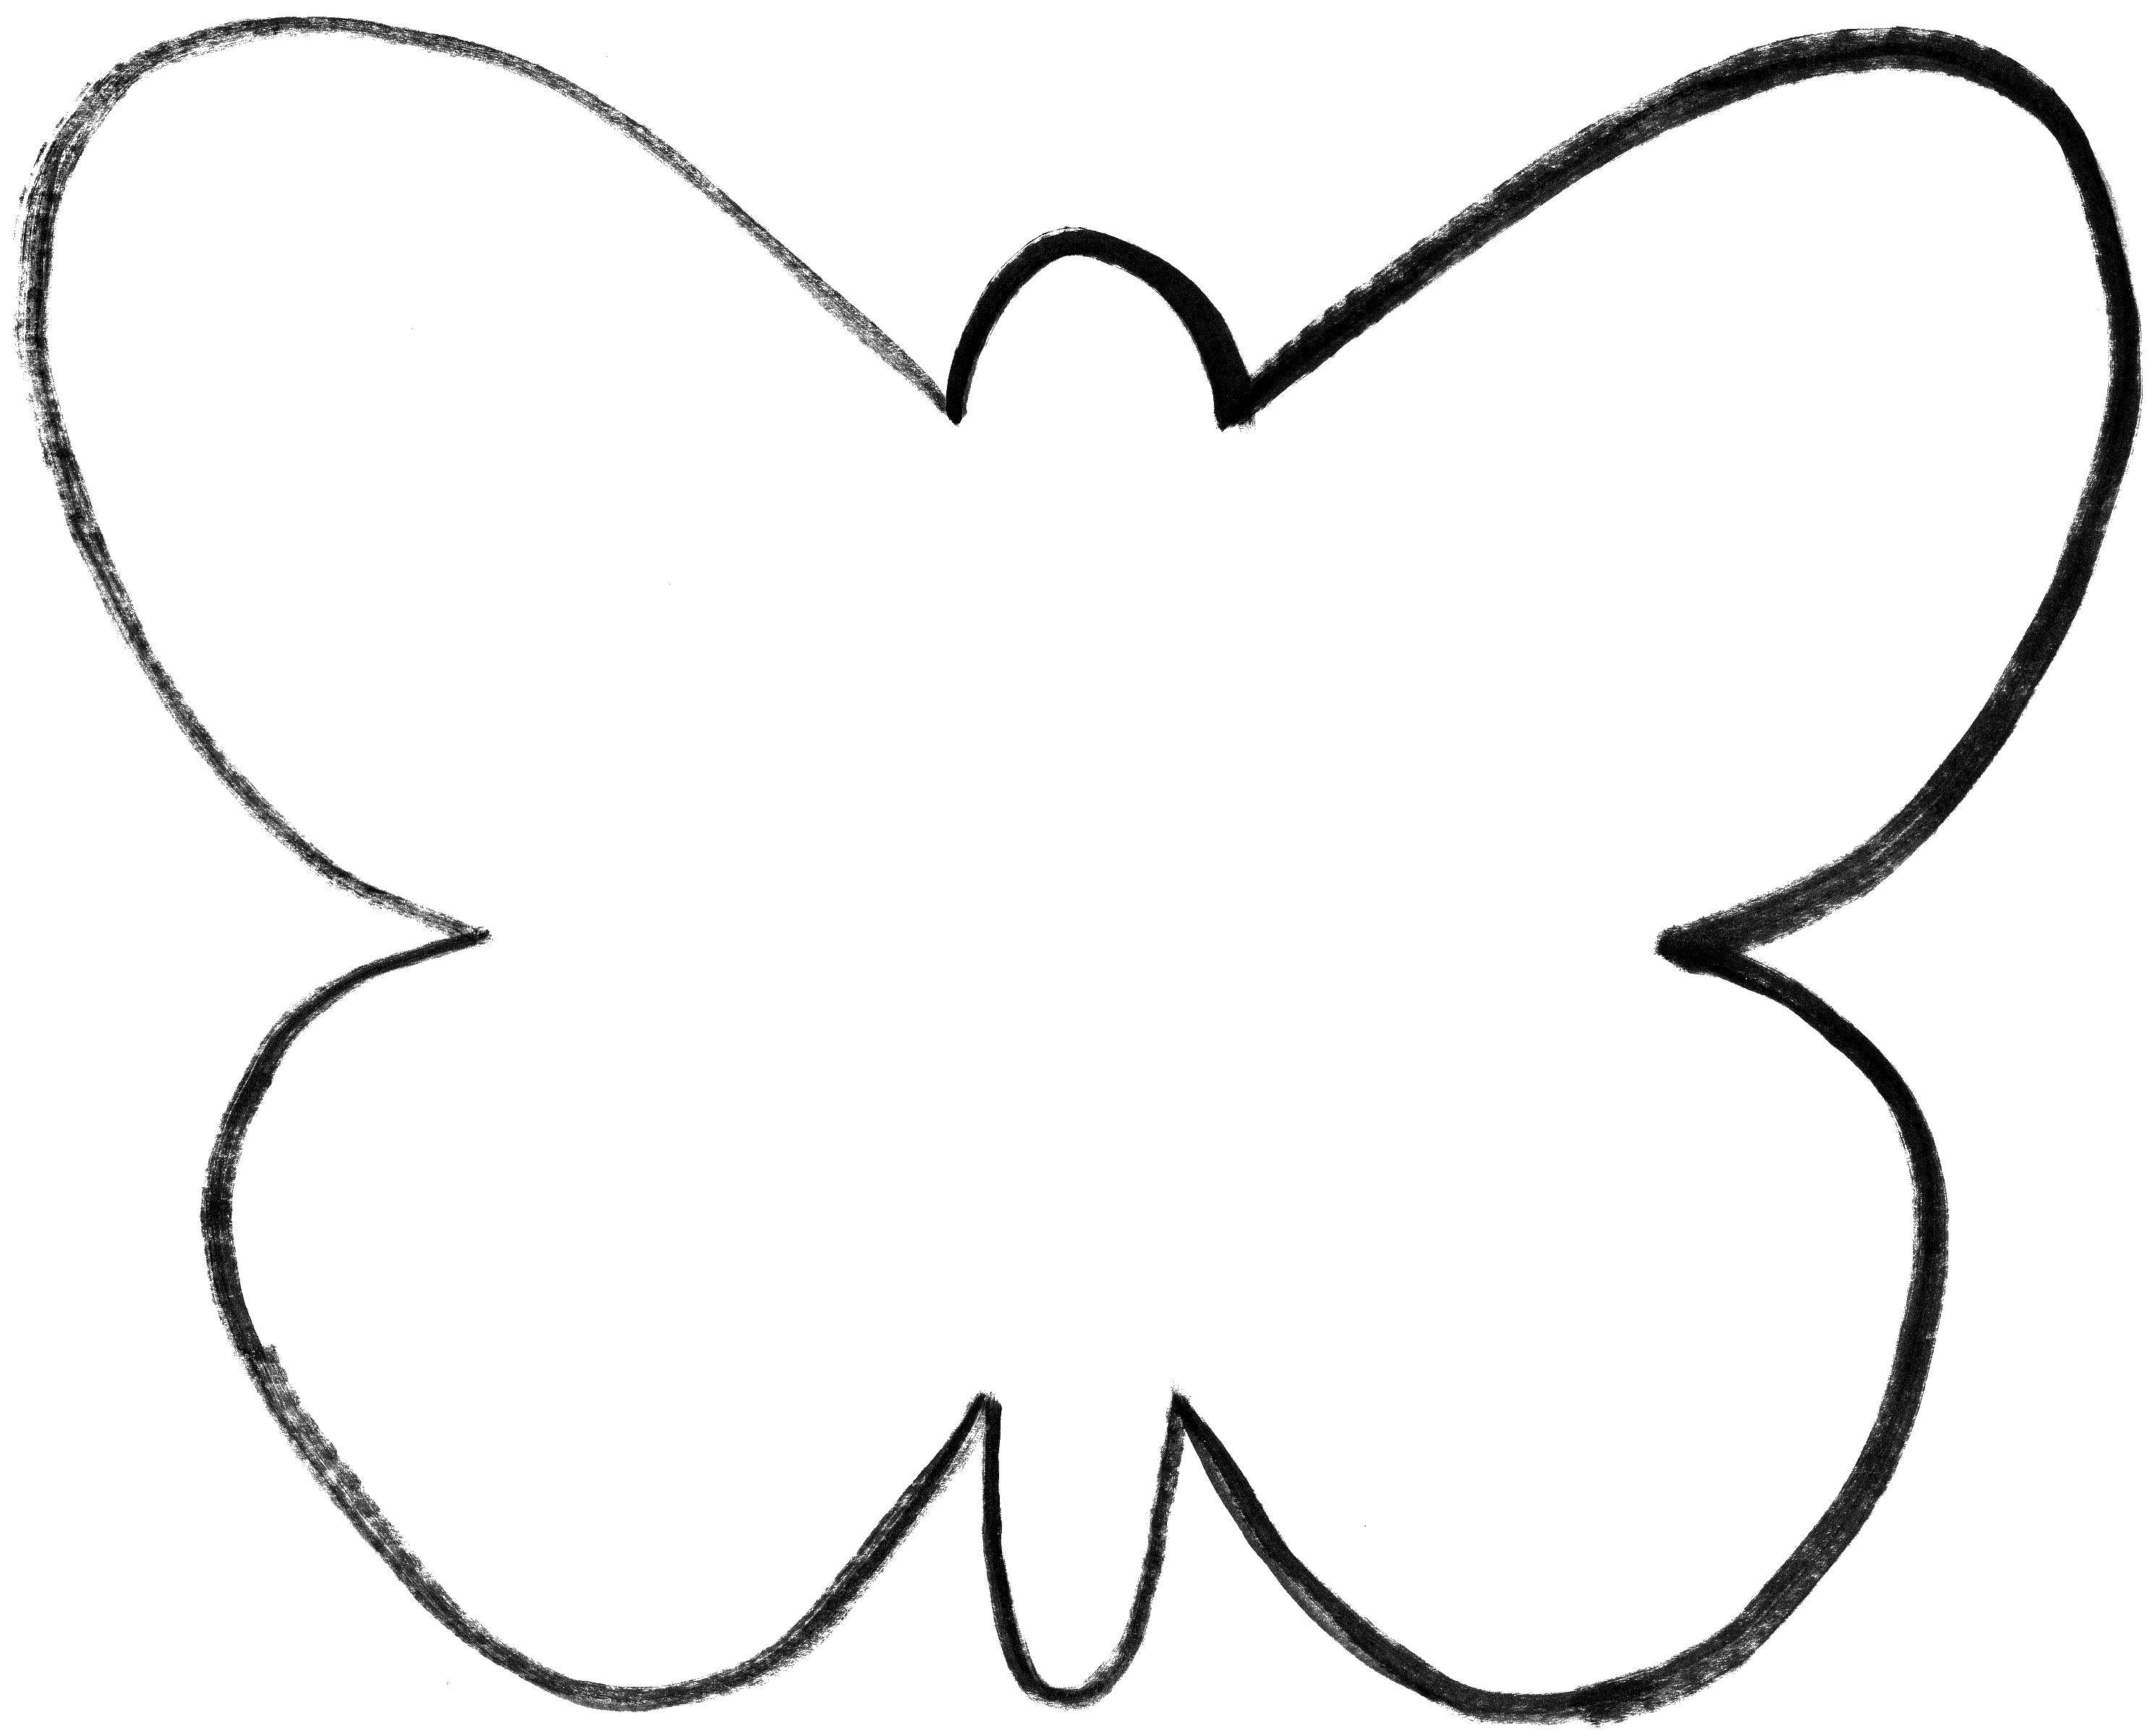 Coloring Butterfly. Category the contours of the butterflies to cut. Tags:  butterfly, contour, contour.